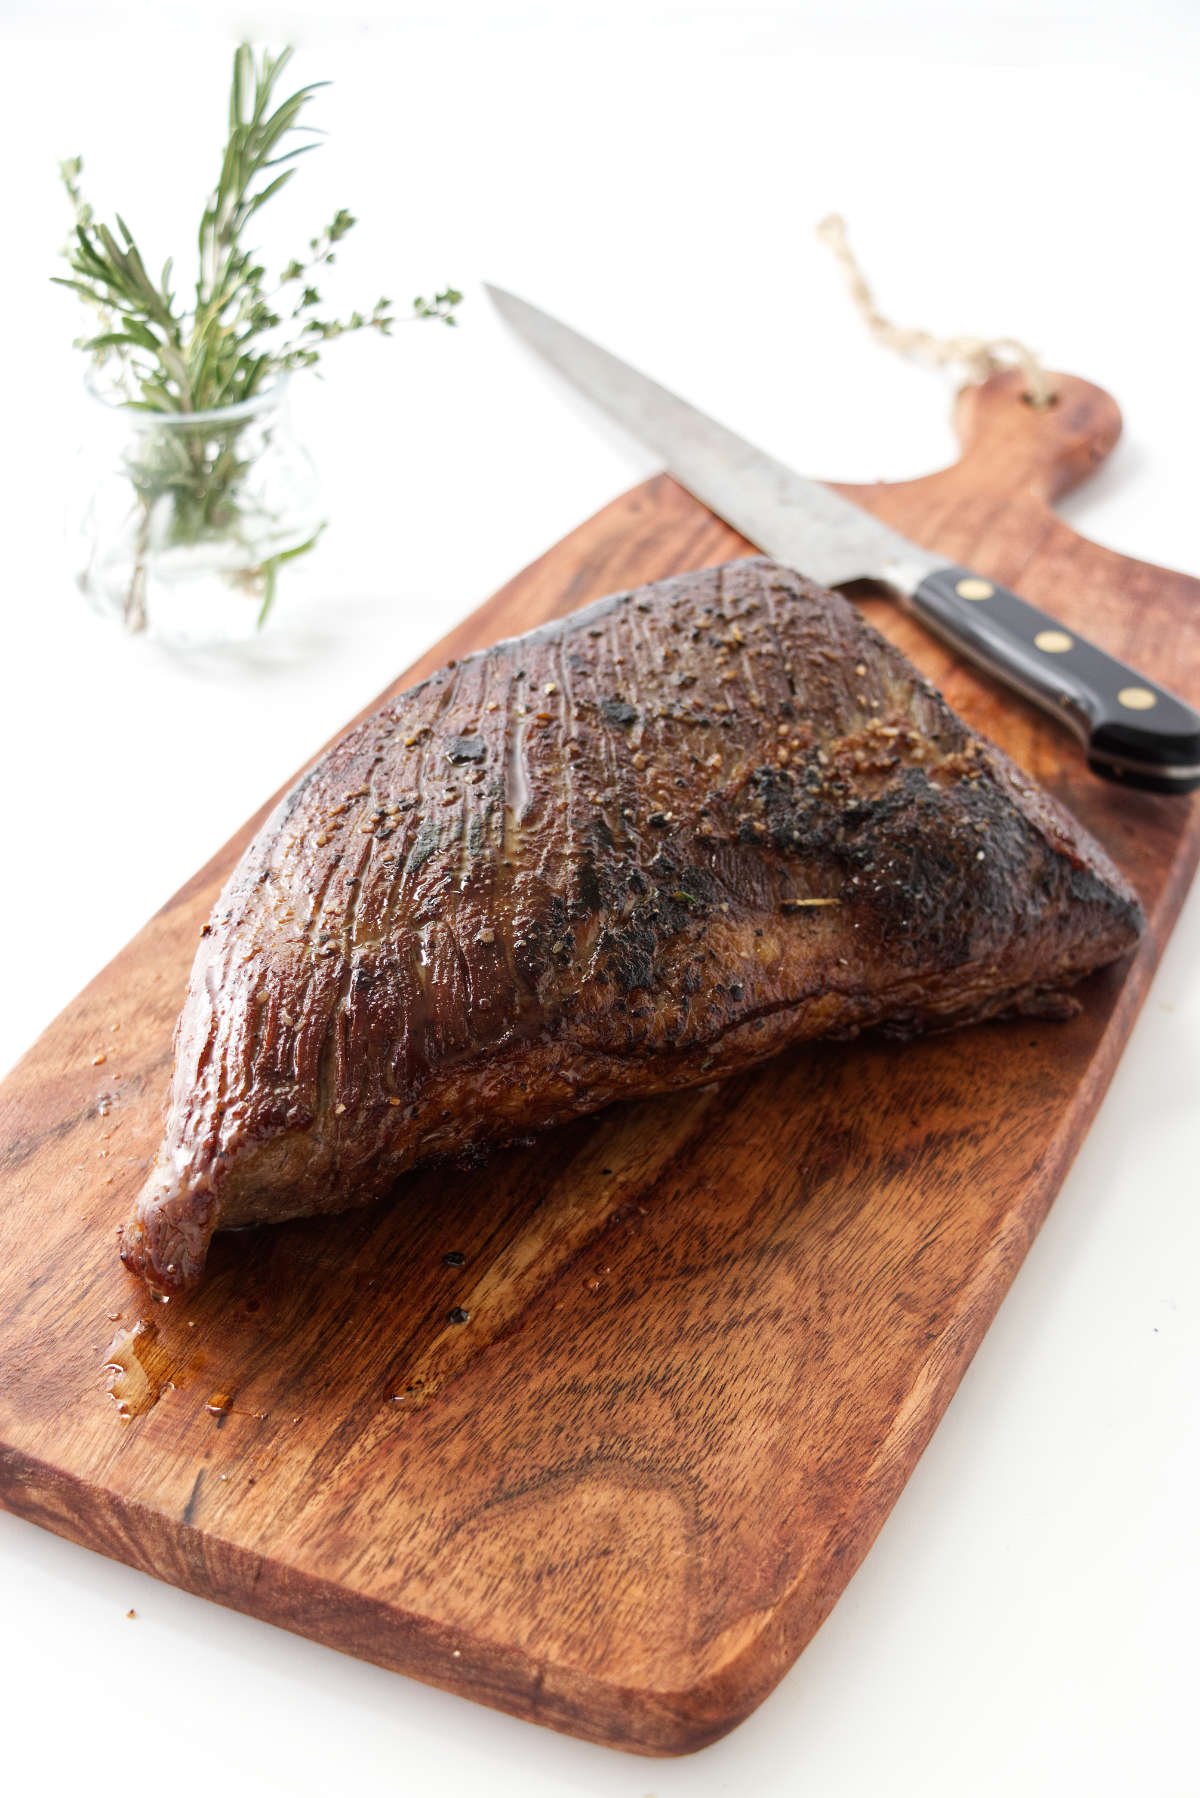 A freshly cooked tri tip roast on a cutting board.